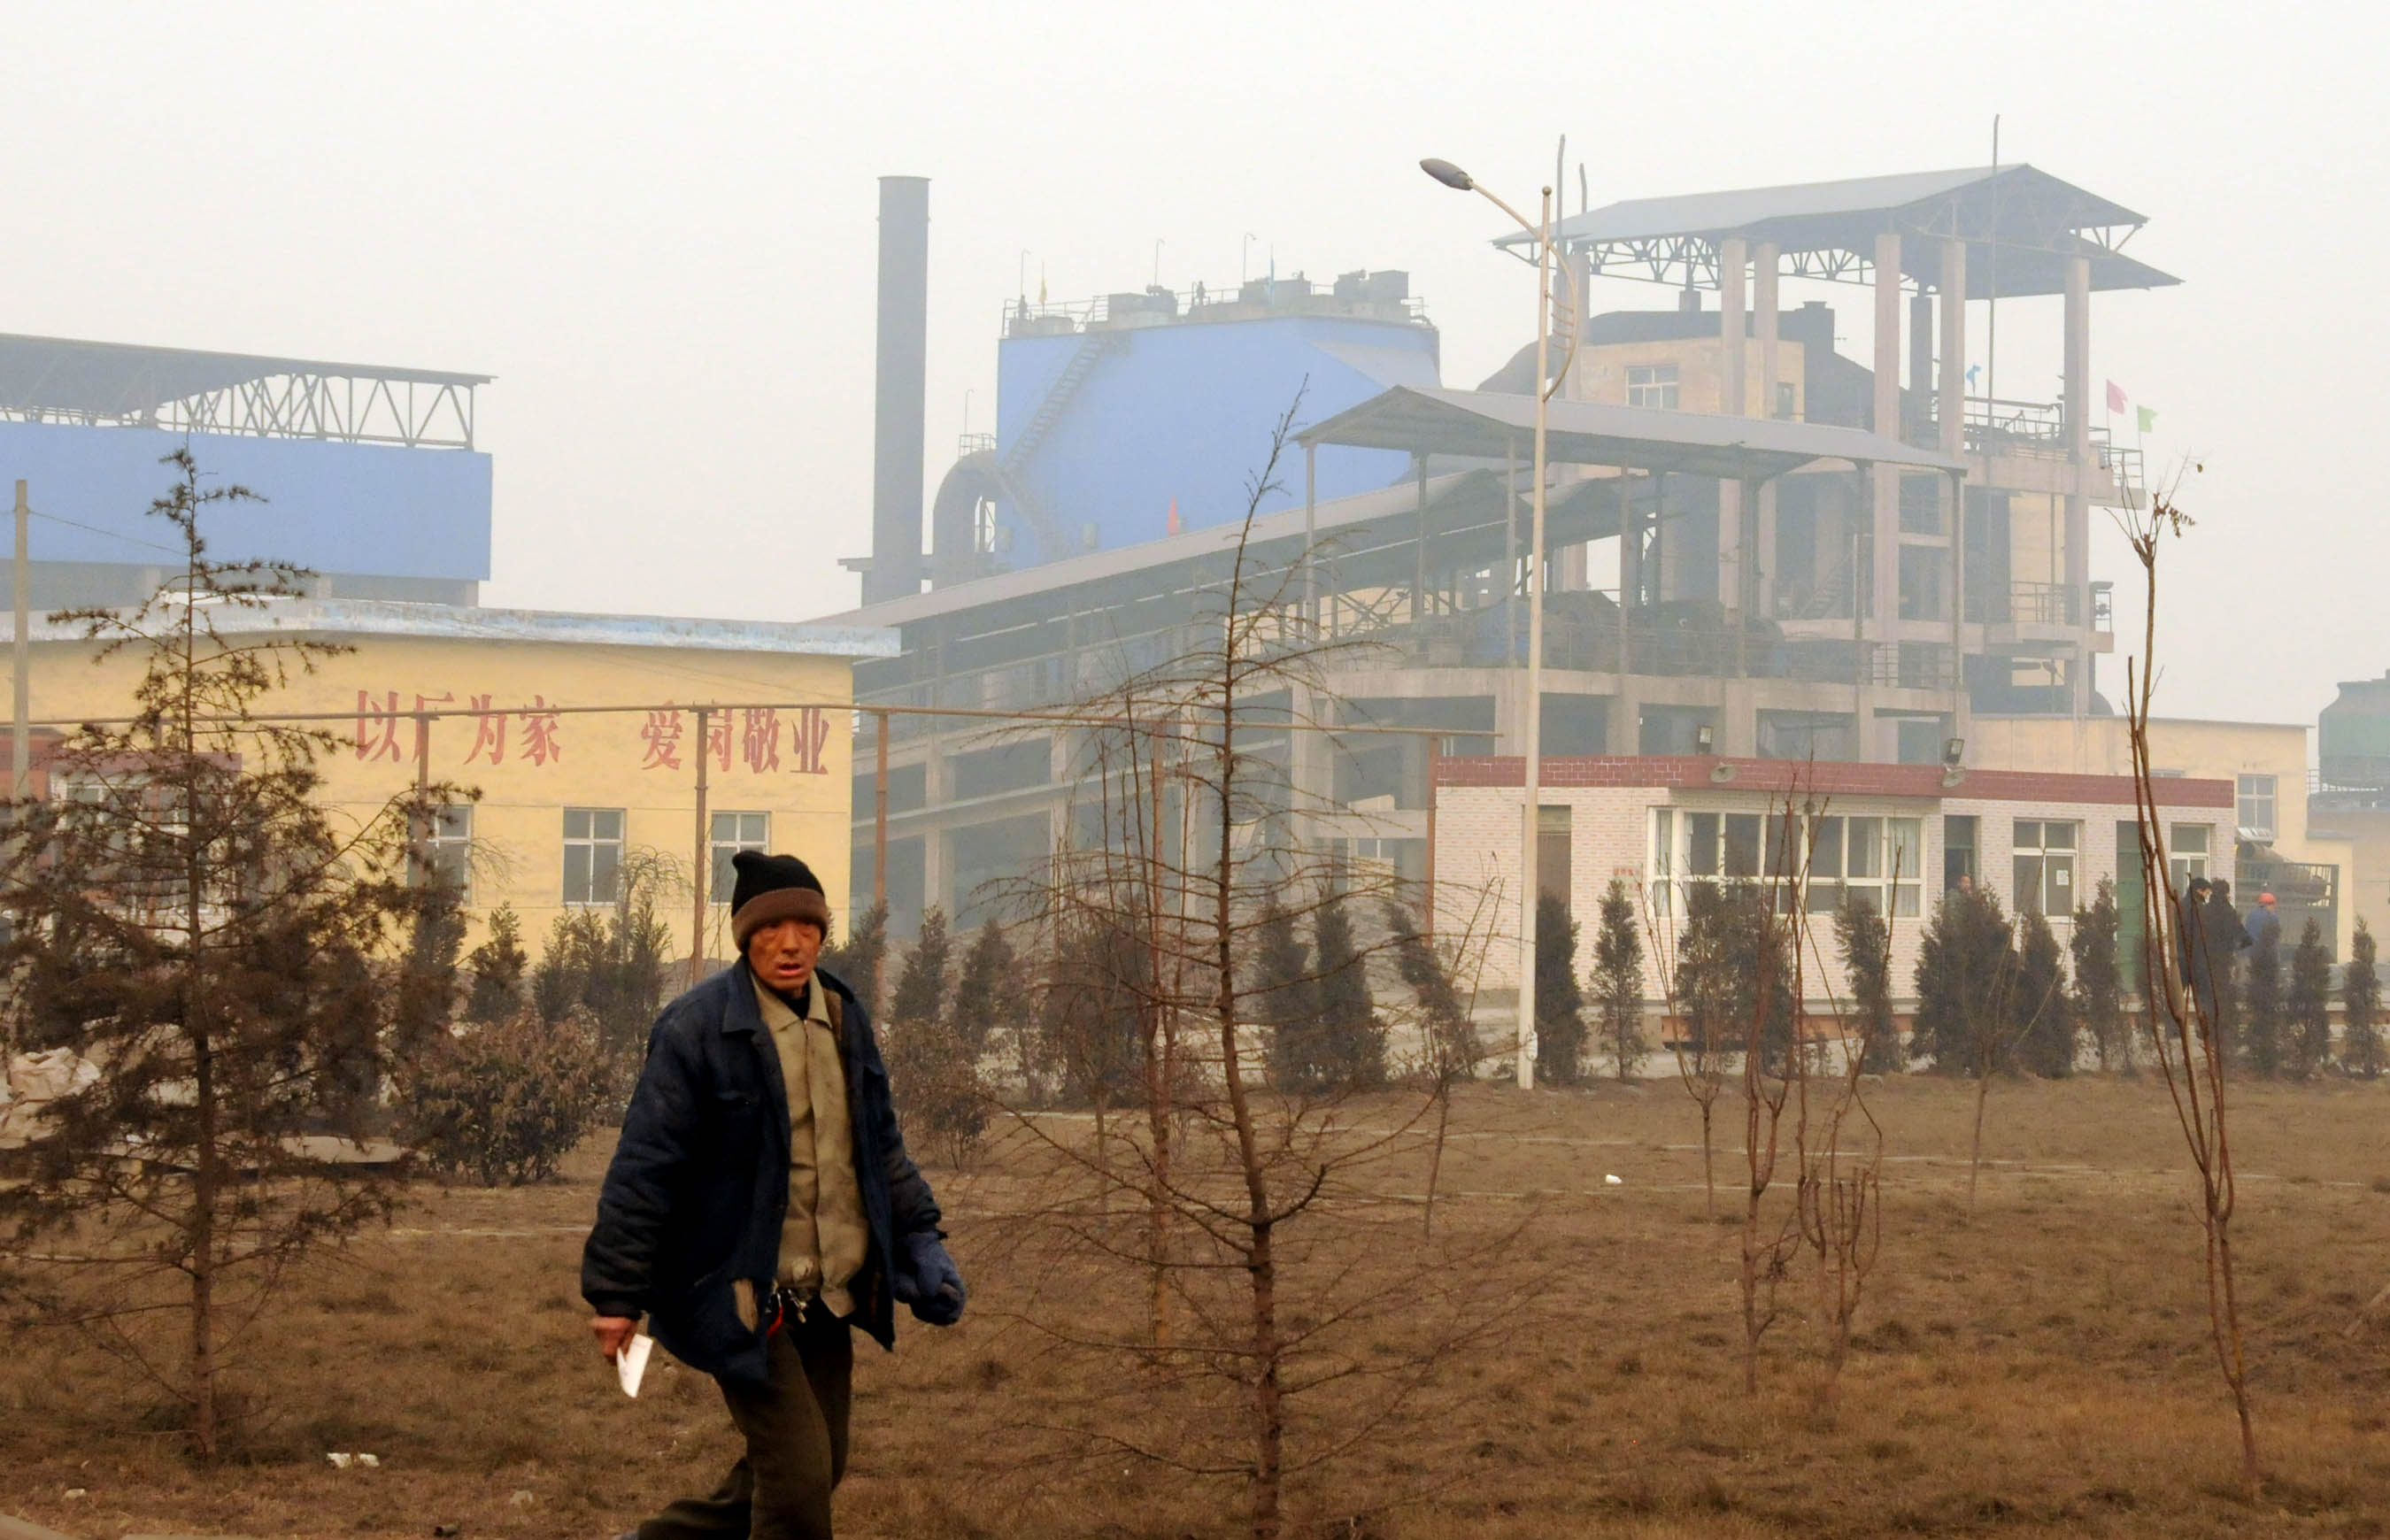 A worker walks in the Shunda Iron and Steel Co., Ltd. in Neiqiu County, north China's Hebei Province, January 18, 2010.